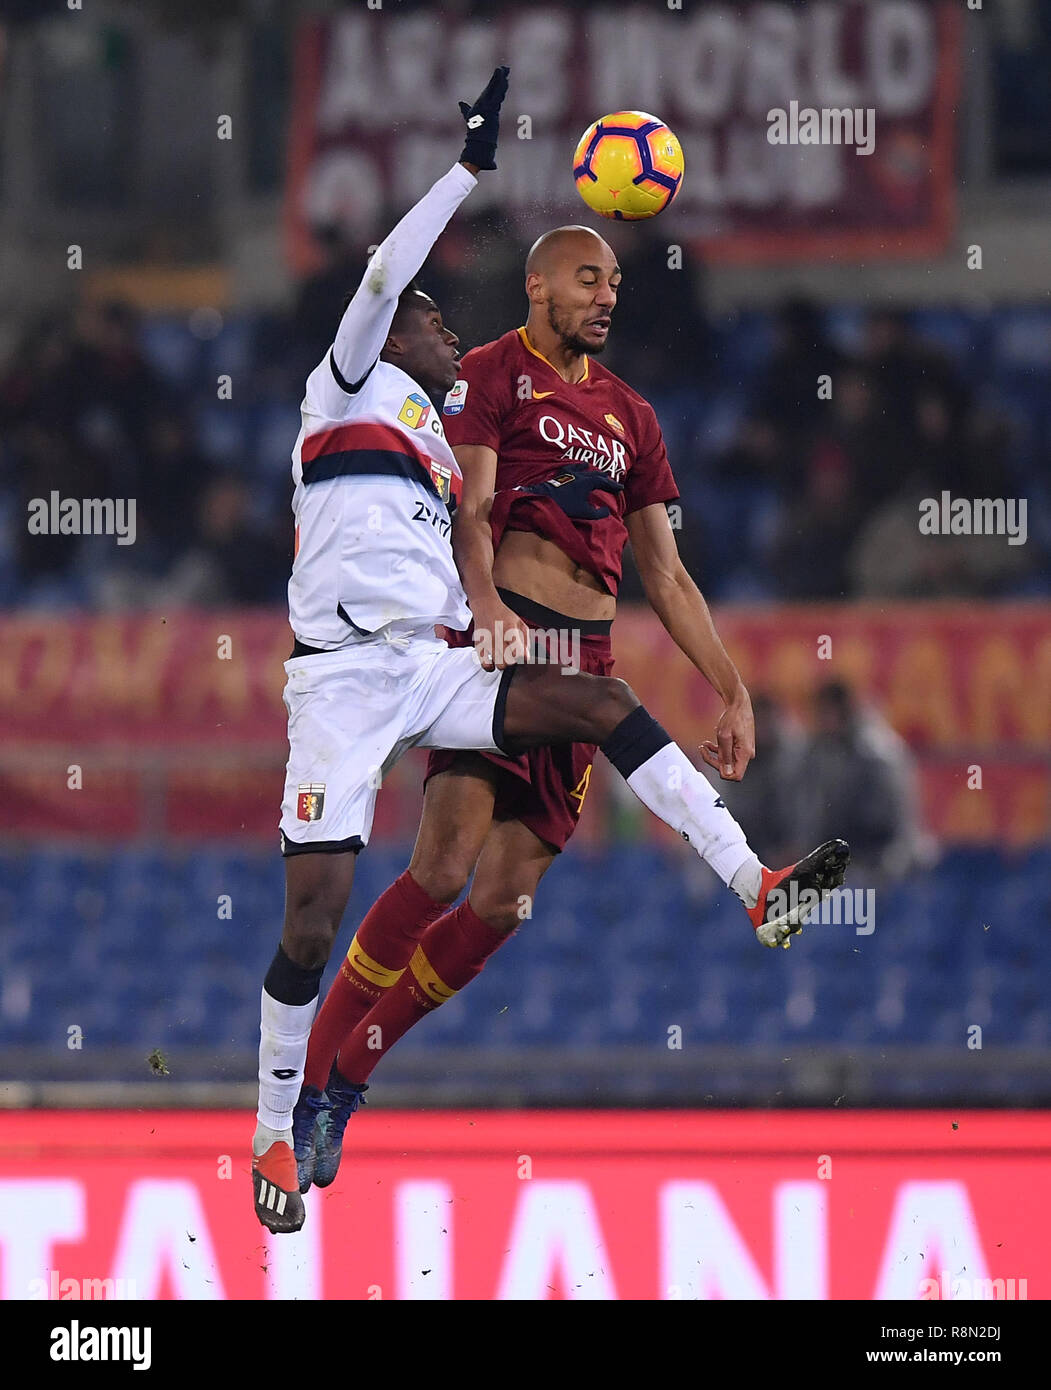 (181217) --ROME, Dec. 17, 2018 (Xinhua) -- AS Roma's Steven Nzonzi (R) vies with Genoa's Christian Kouame during the Serie A soccer match between Roma and Genoa, in Rome, Italy, Dec.16, 2018. AS Roma won 3-2. (Xinhua/Alberto Lingria) Stock Photo